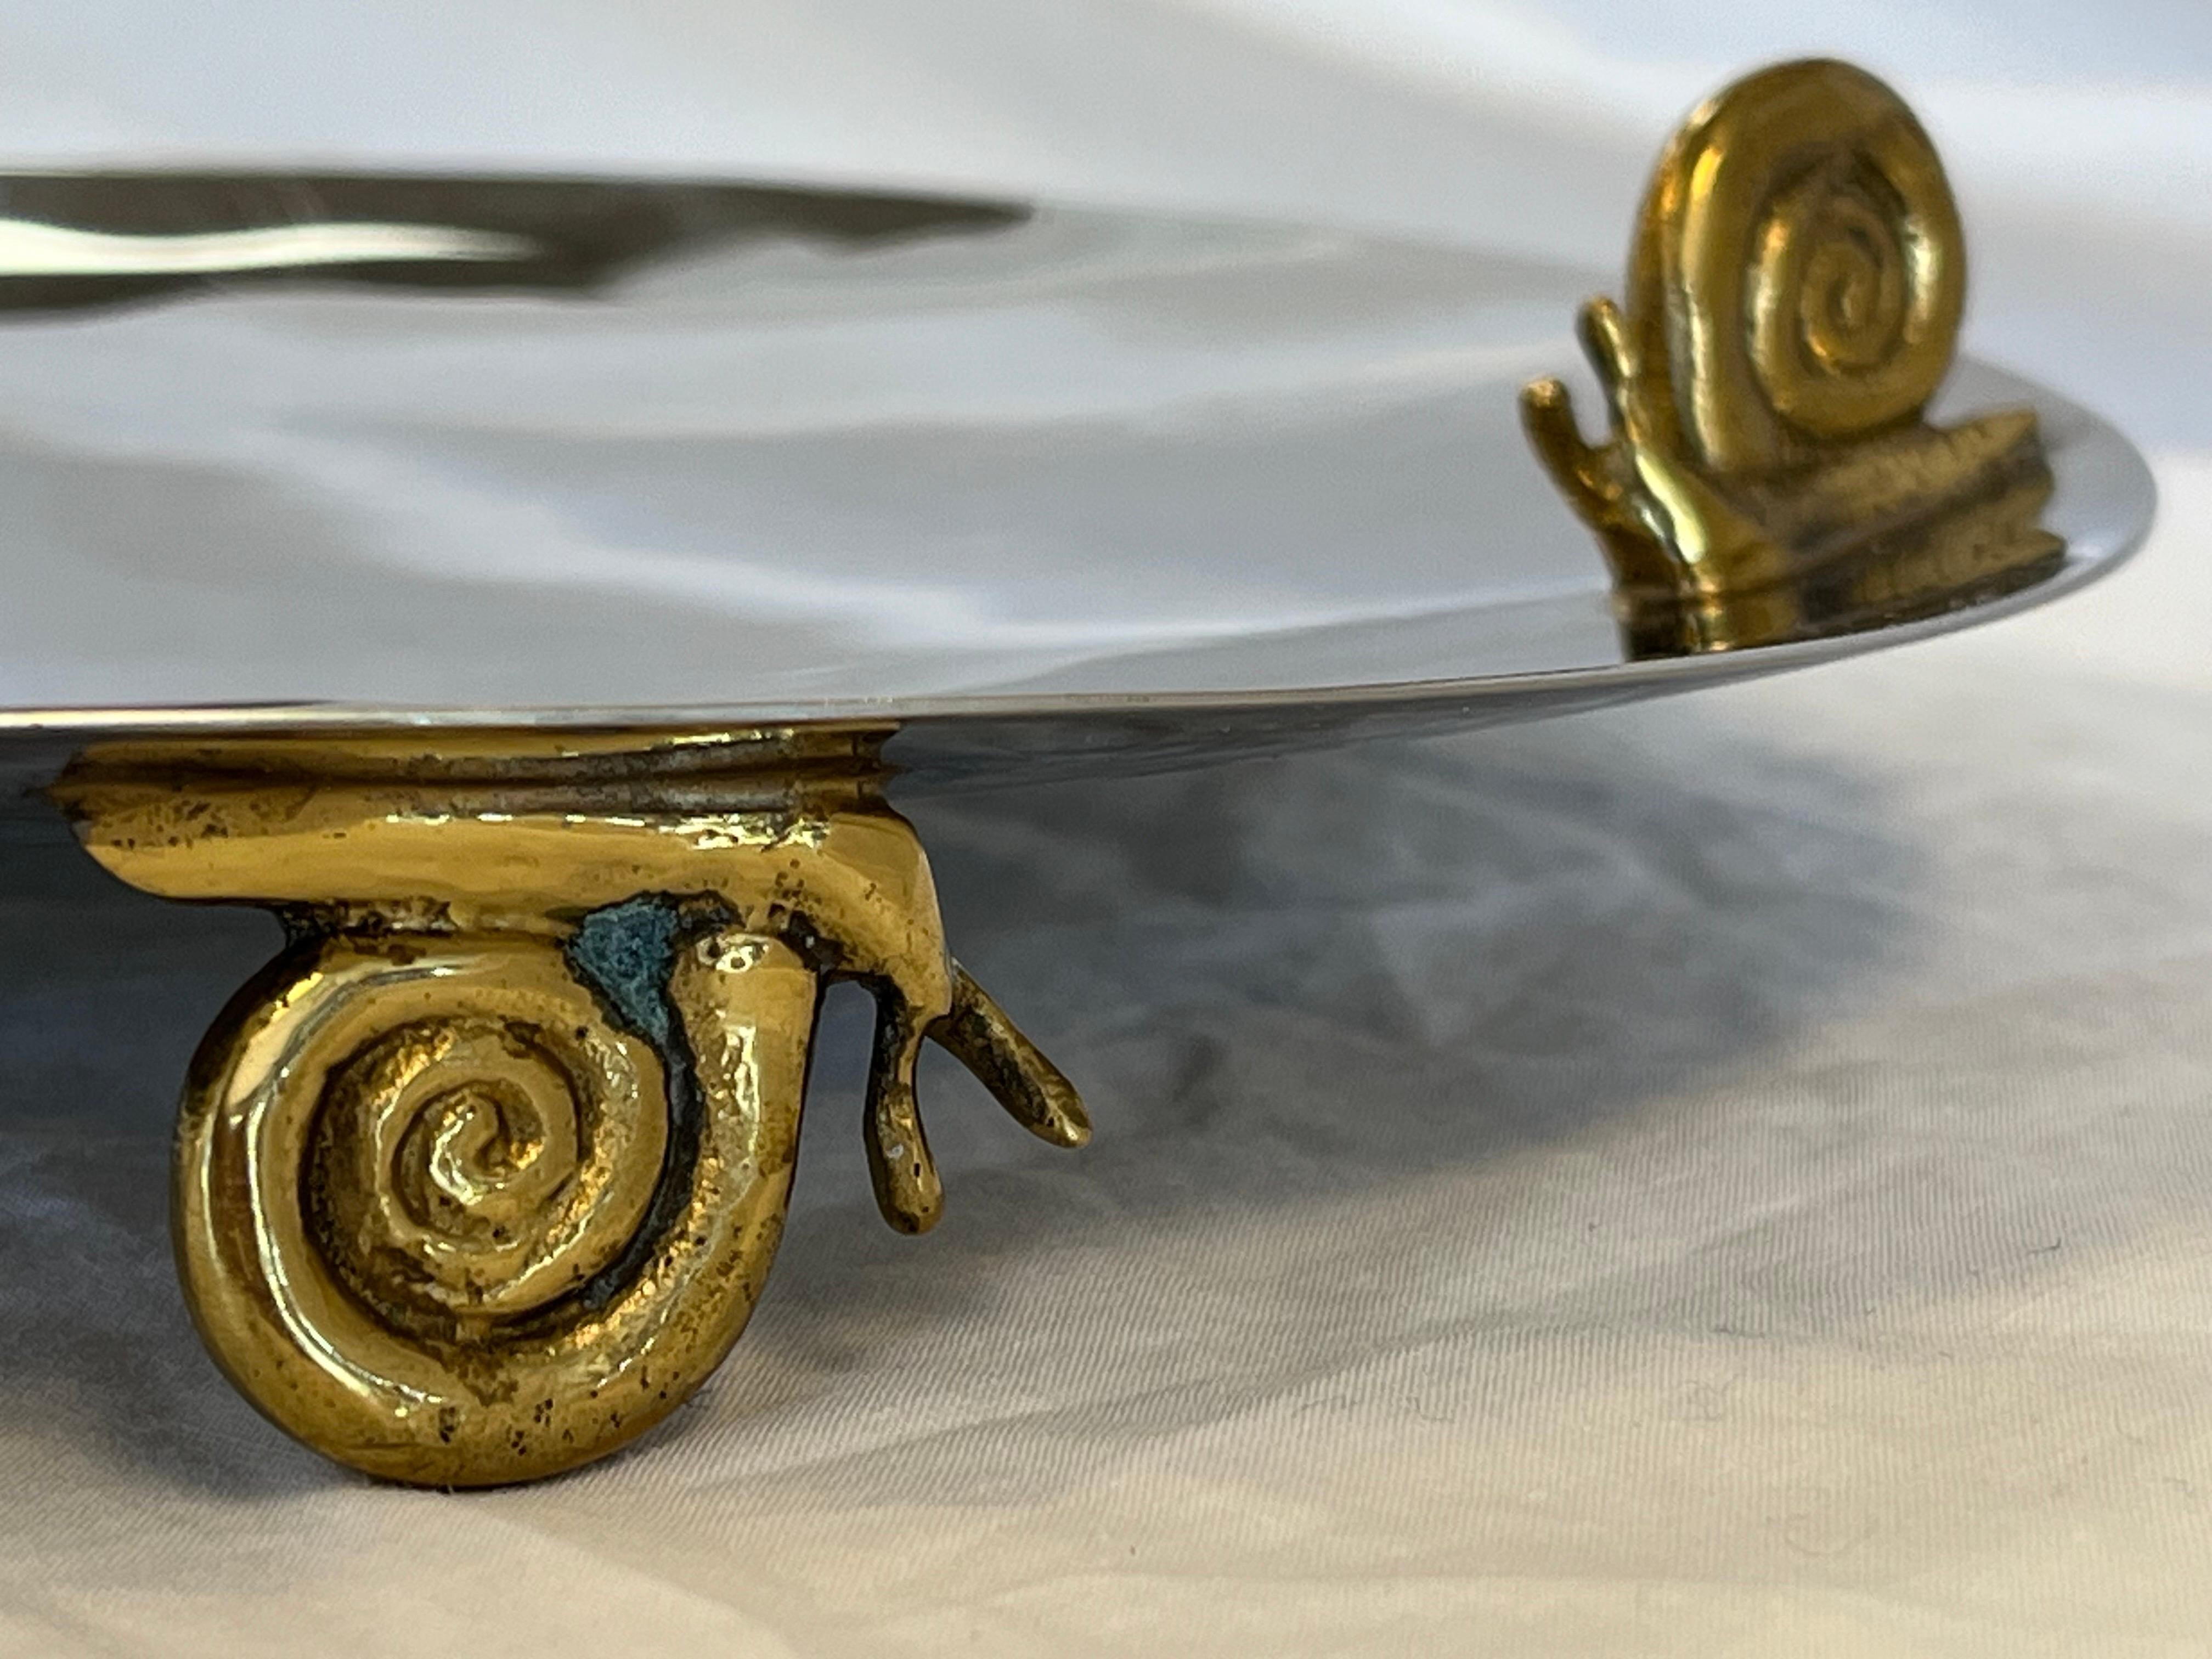 Contemporary Vintage Michael Aram Stainless Steel and Brass Snail Serving Platter or Tray